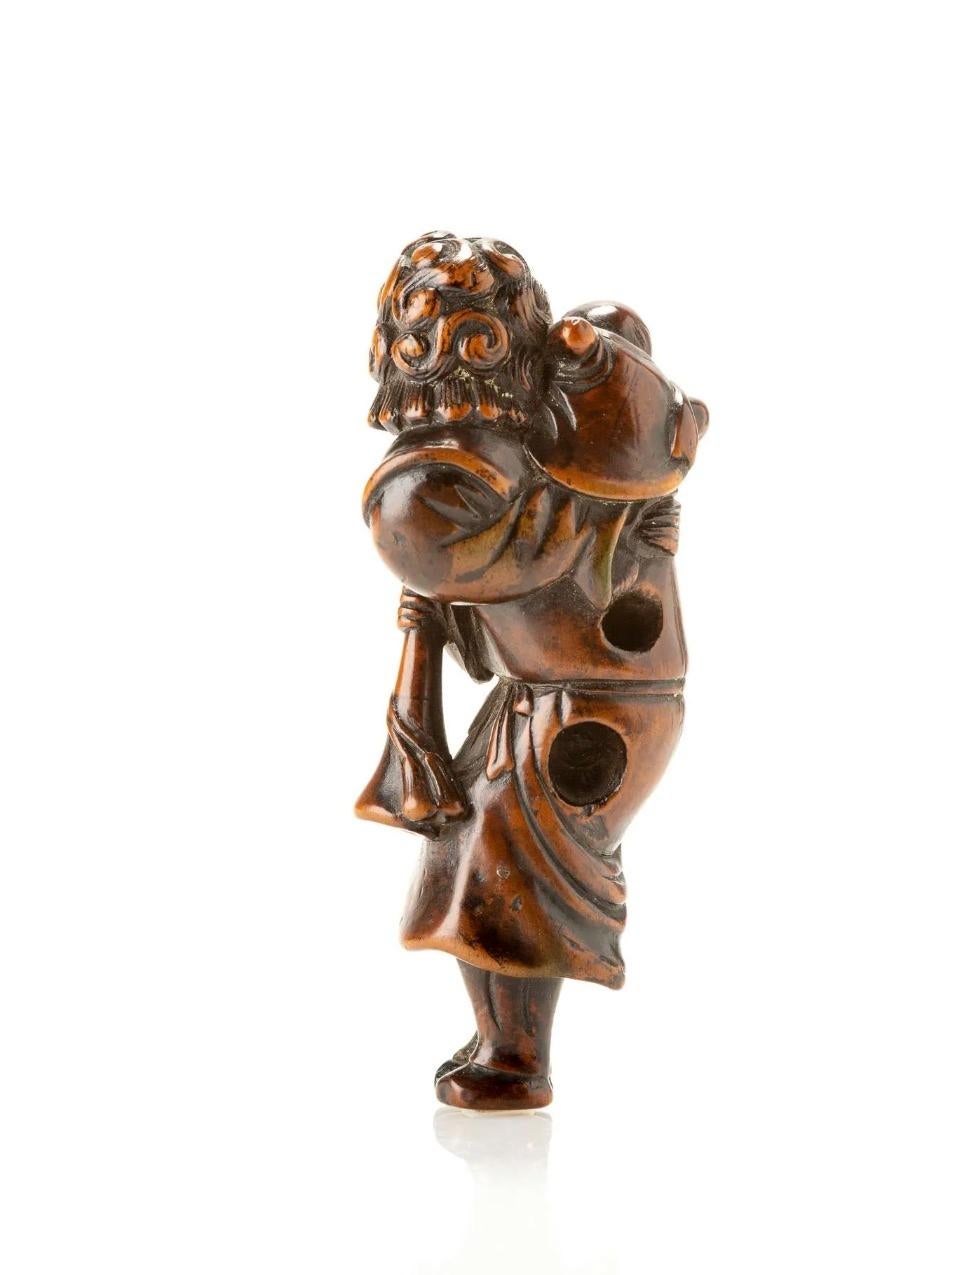 Boxwood netsuke depicting a Dutchman with a child on his shoulder and a trumpet.

Excellent blond patina on the front contrasting with the darker part on the back.

Large himotoshi holes in the flank.

Origin: Japan

Period: Edo 18th